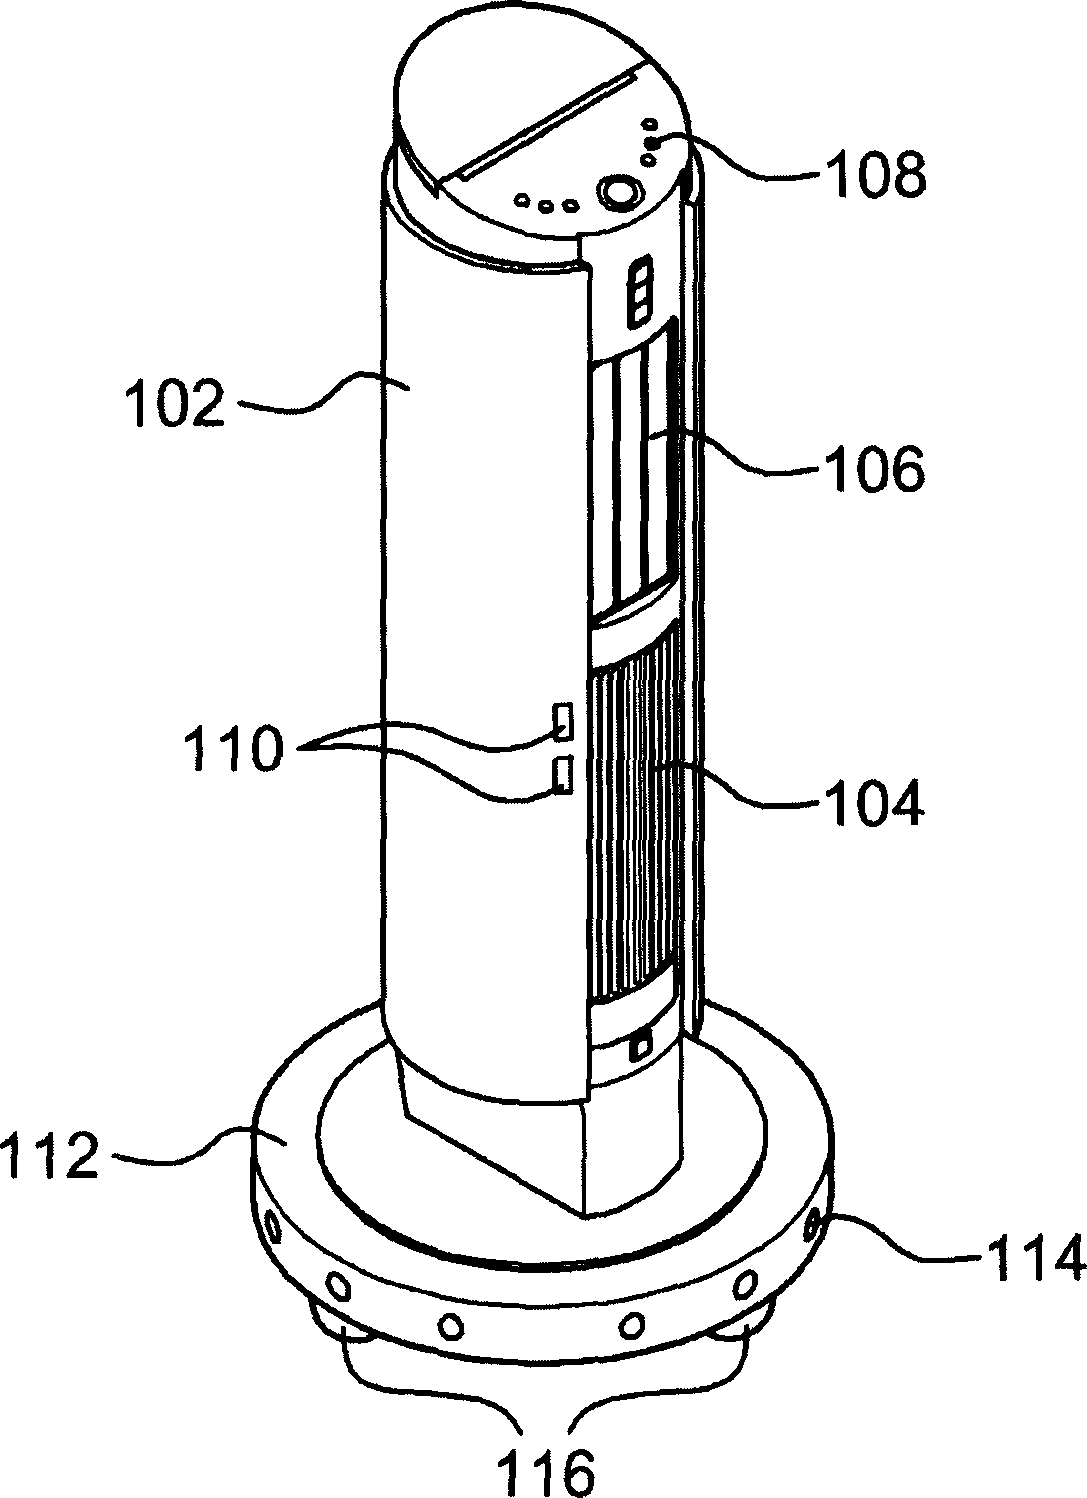 Air purifier and control method thereof